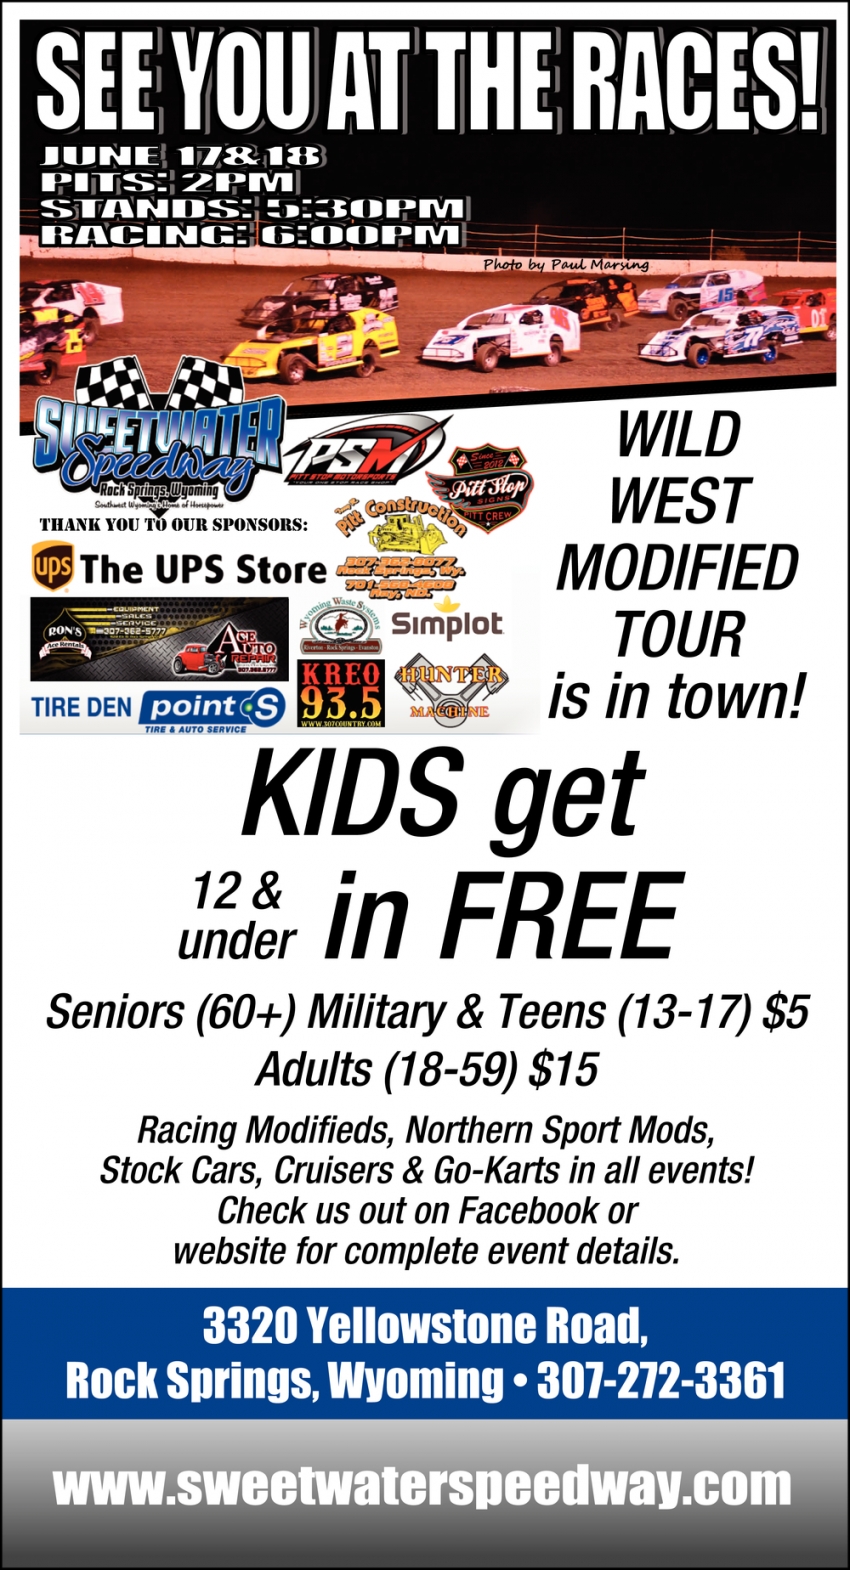 See You At The Races Sweetwater Speedway Rock Springs WY